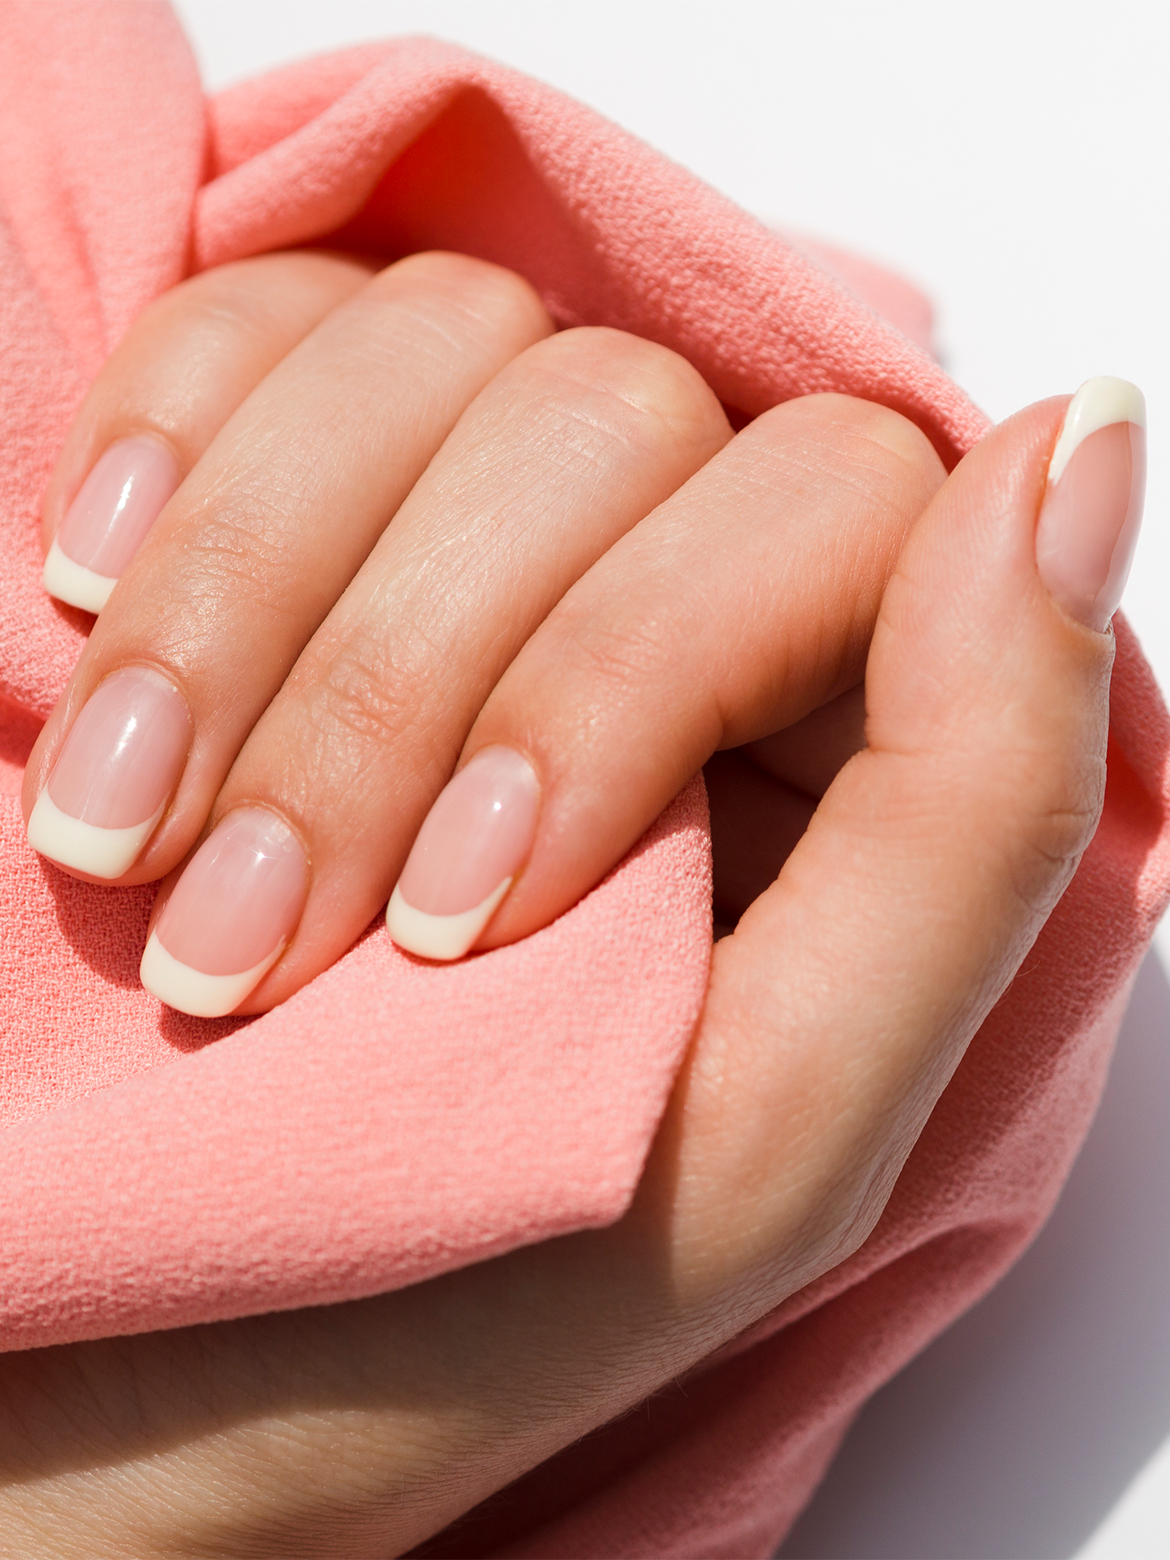 Tips for Beautiful Nails